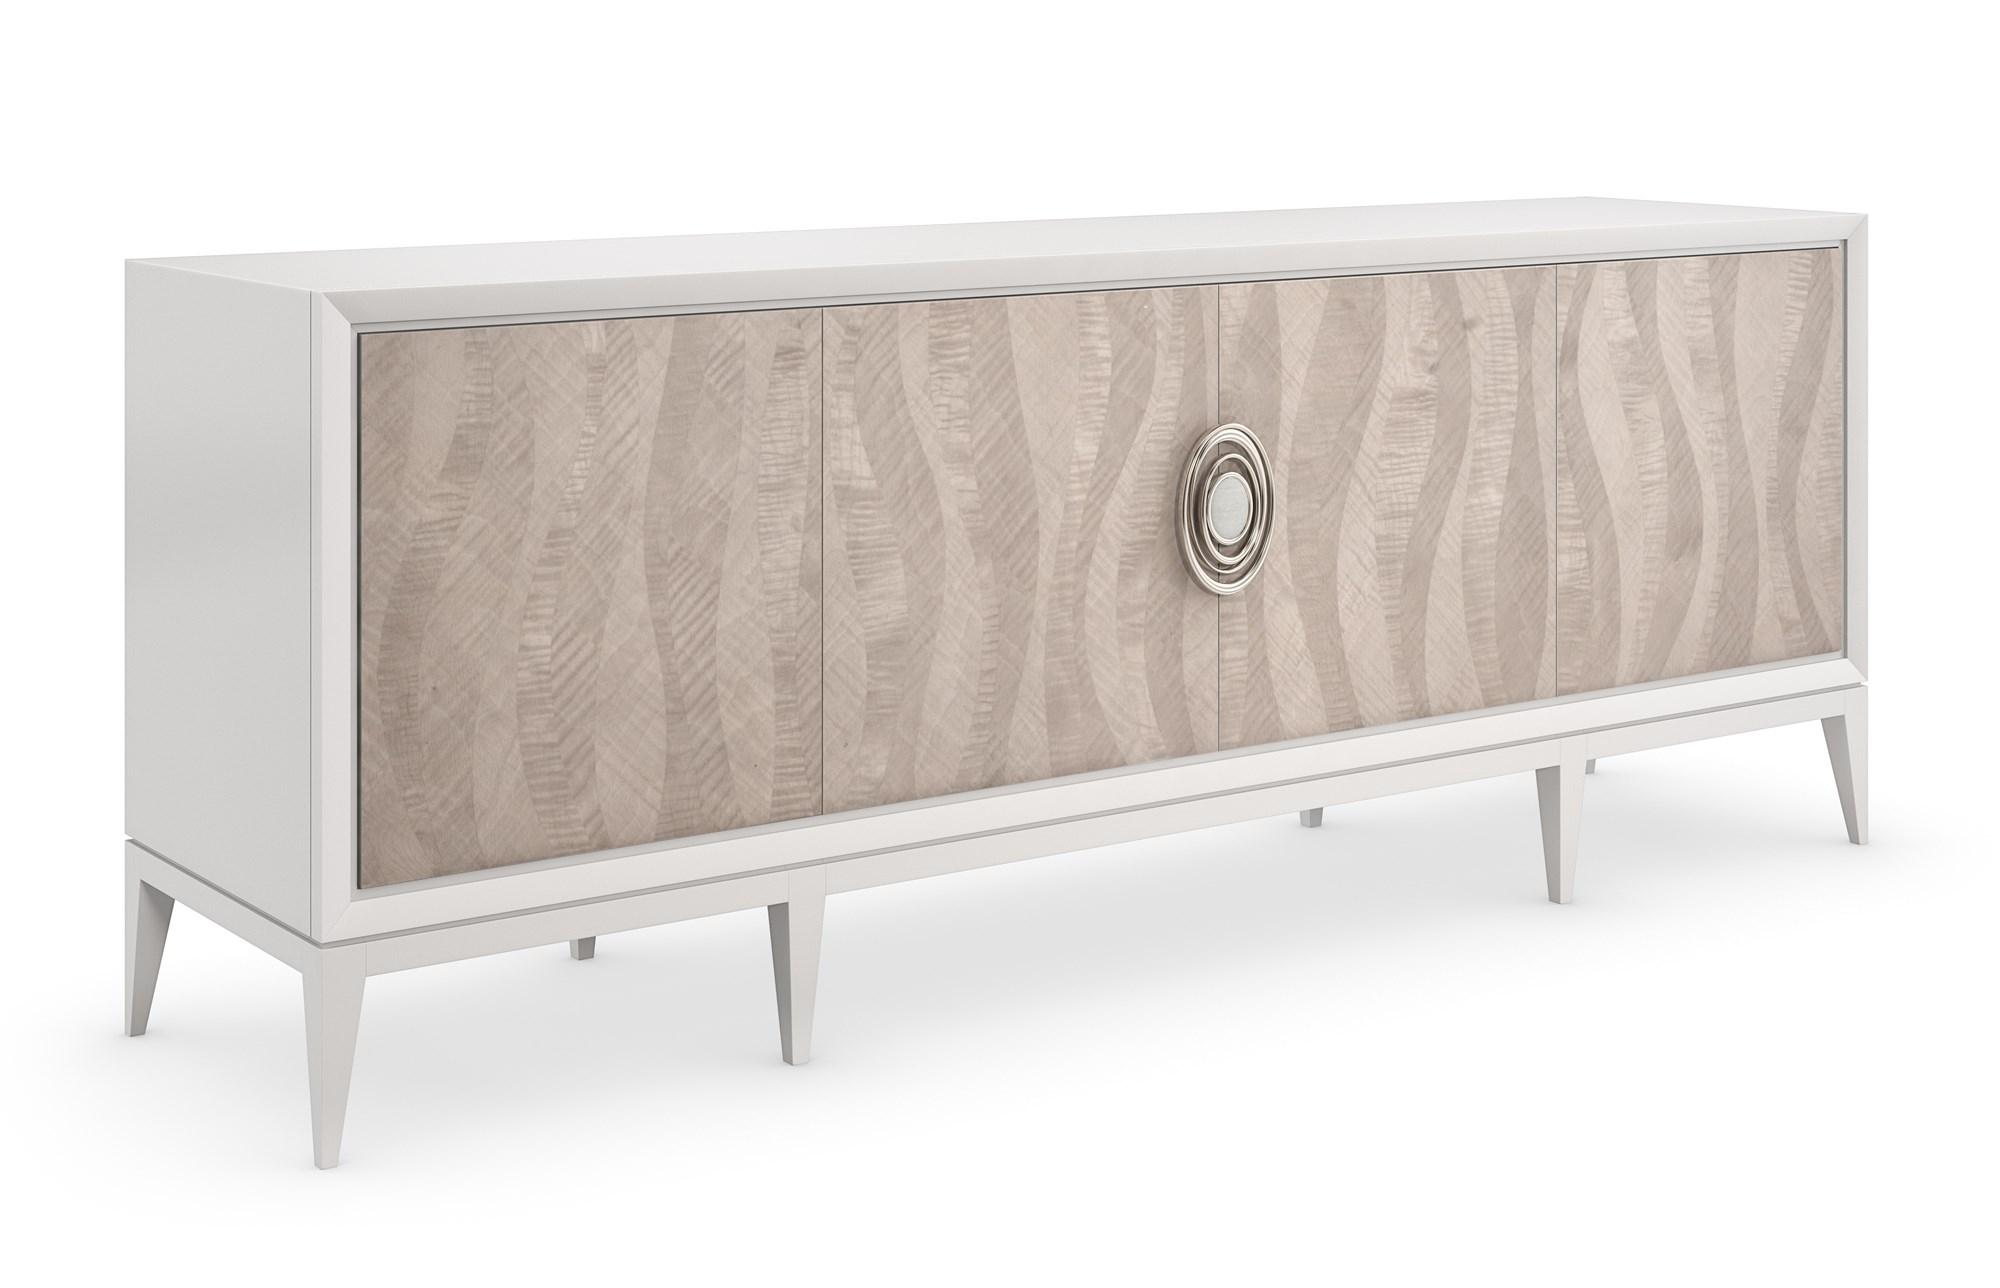 Contemporary Media Console NOW STREAMING CLA-422-533 in Almond 